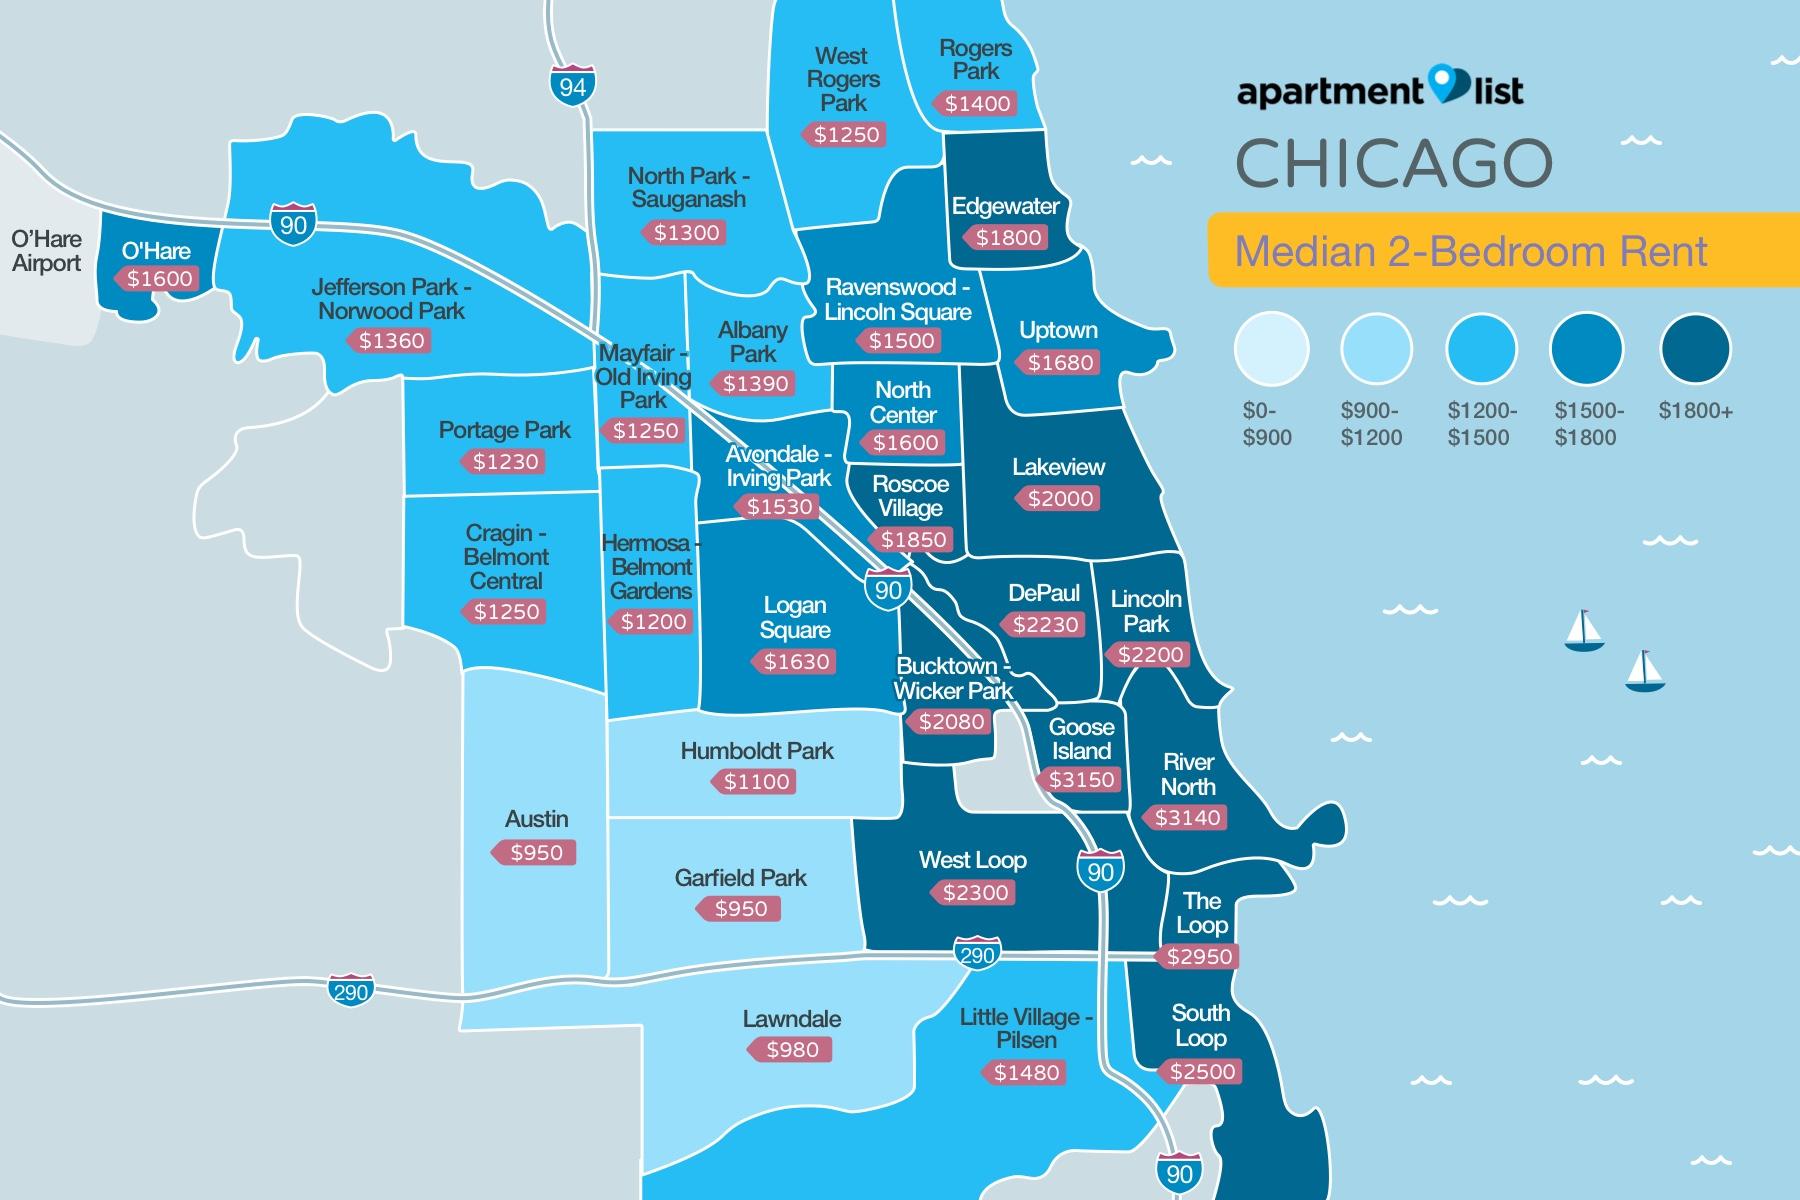 Map shows variety in rent prices of two-bedroom units throughout a number of neighborhoods. (Courtesy of Apartment List)